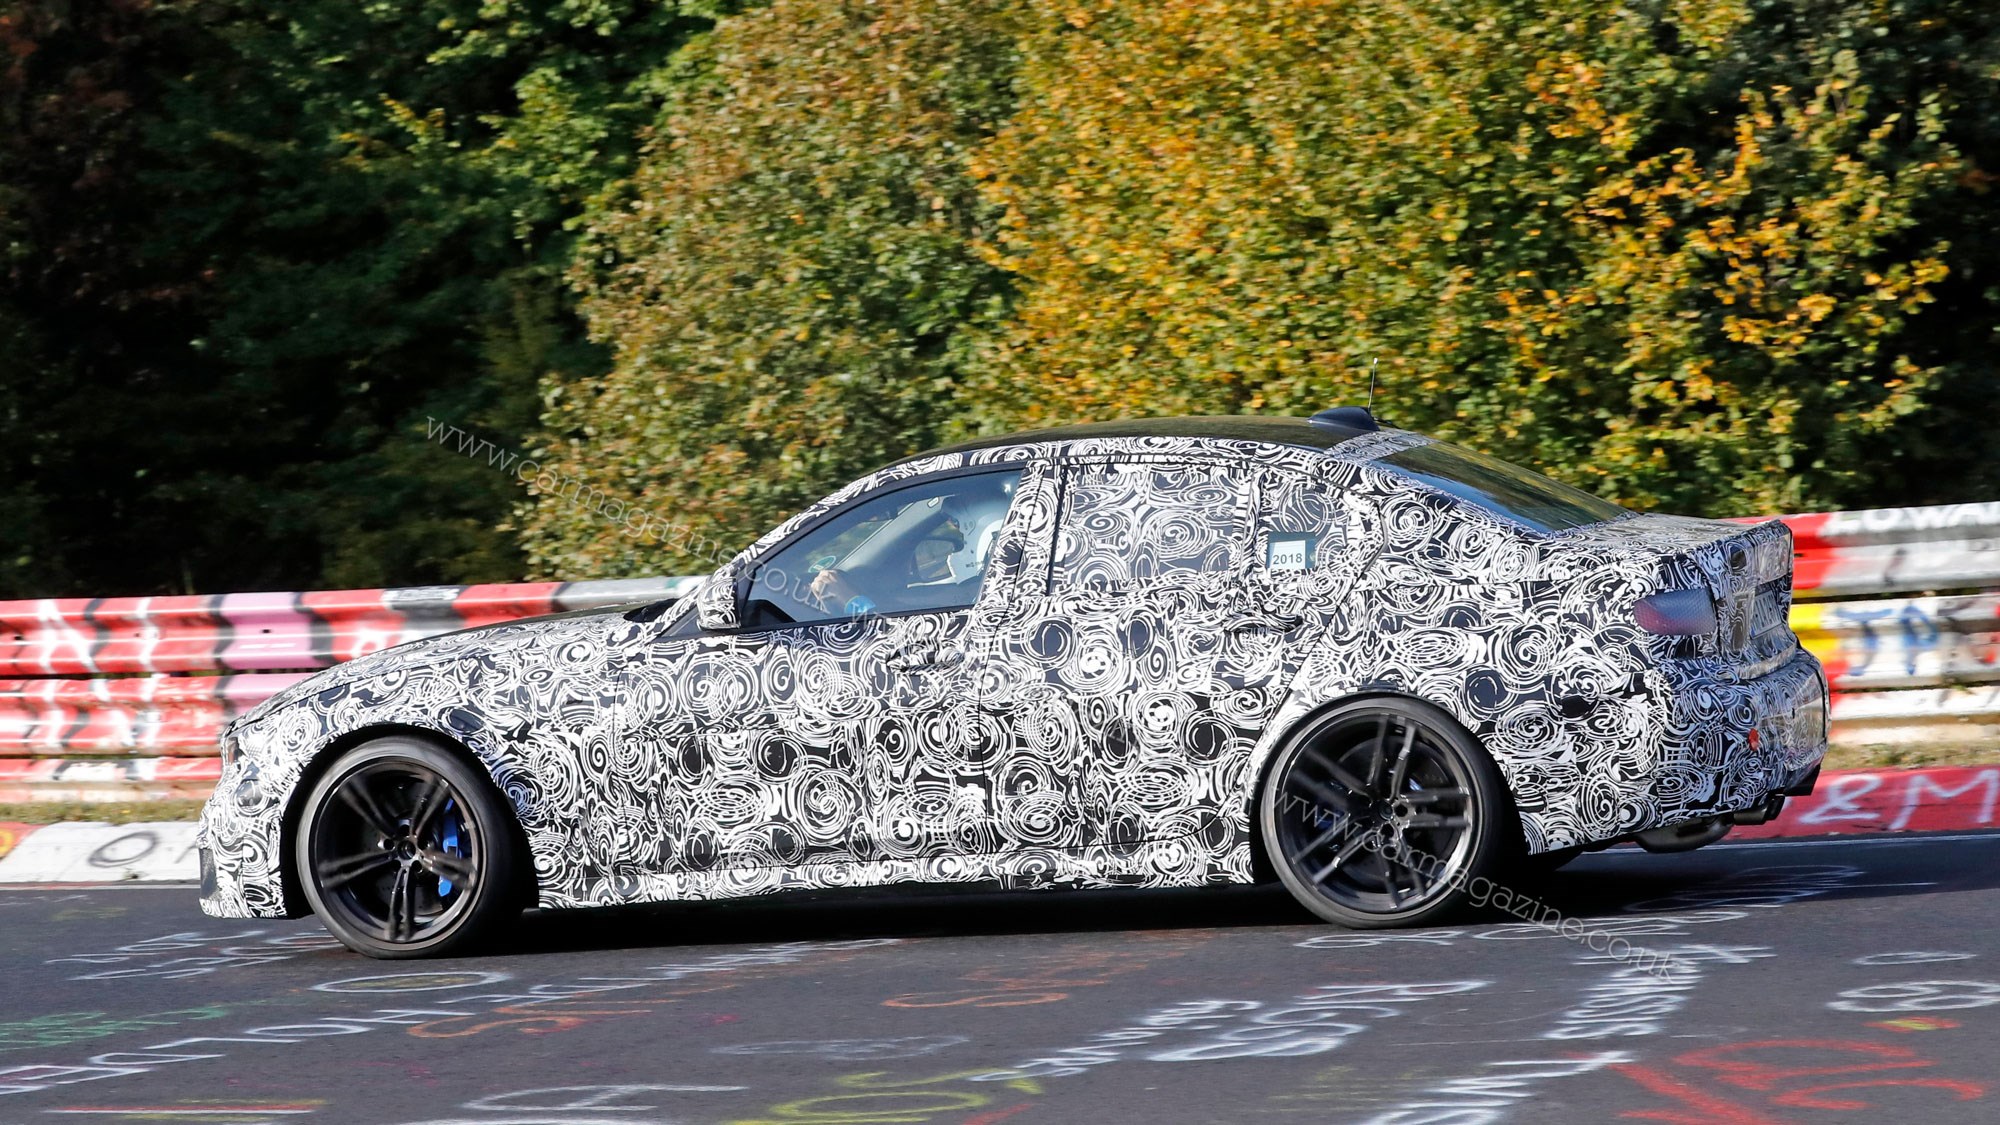 New 2020 BMW M3 (G80): prototype spied testing at the ...